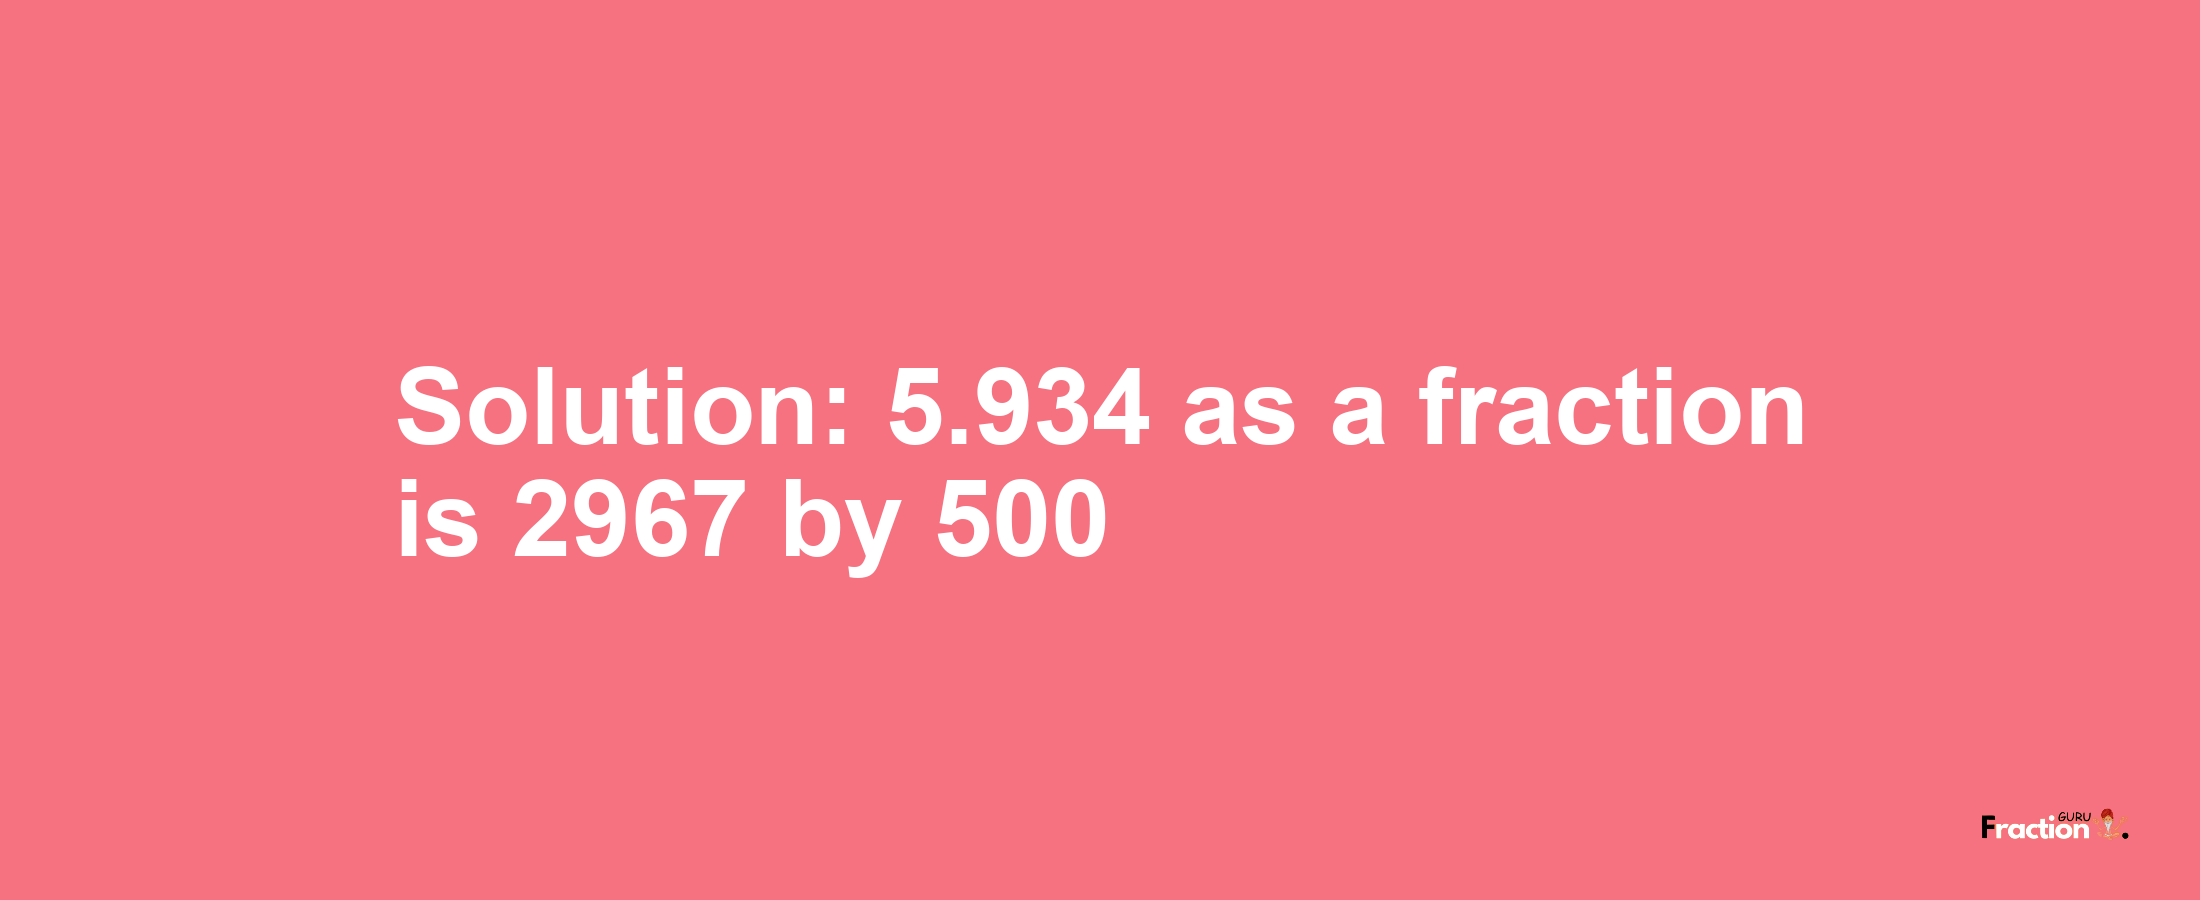 Solution:5.934 as a fraction is 2967/500